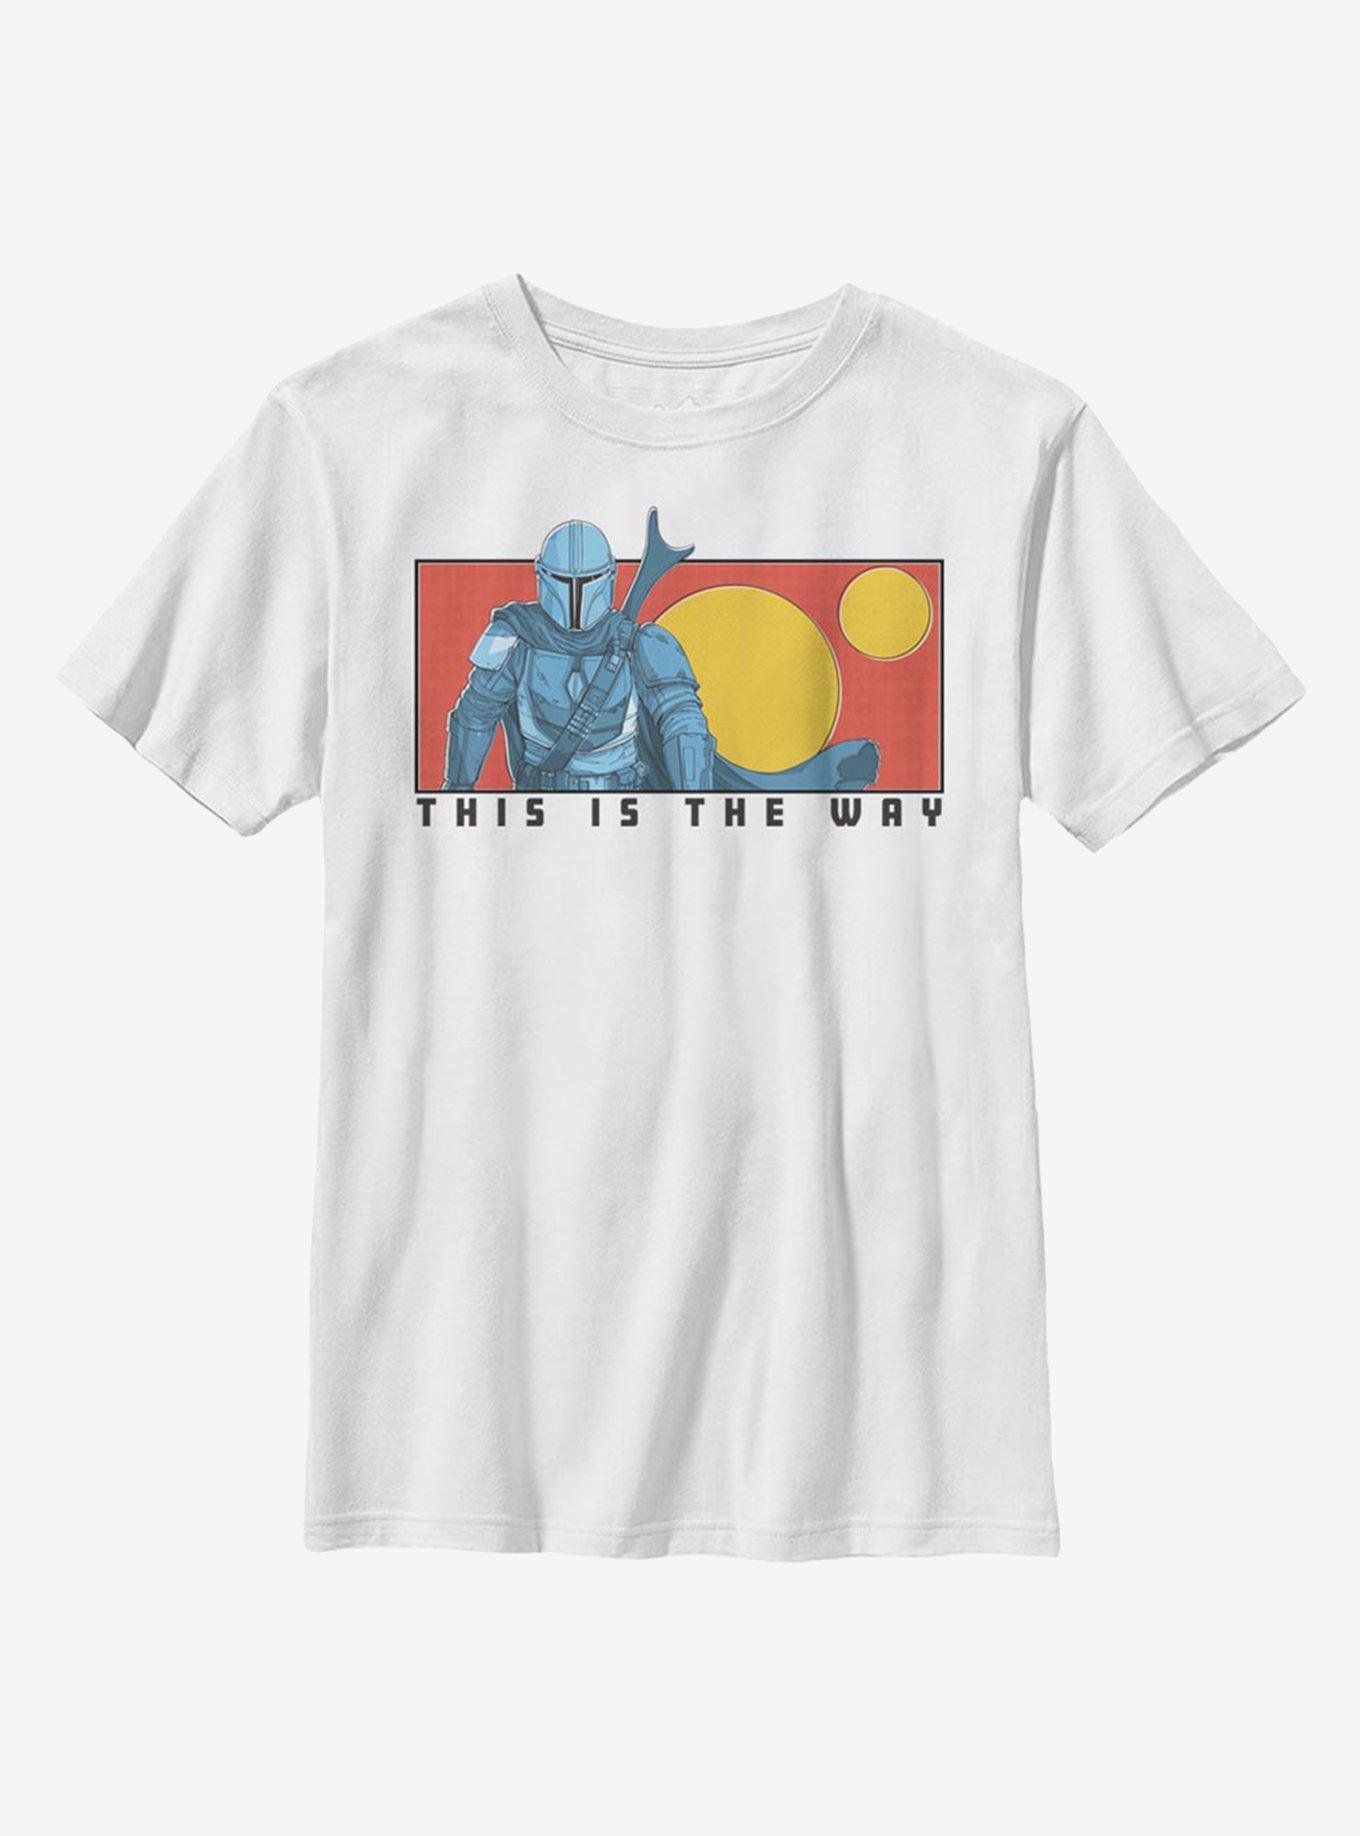 Star Wars The Mandalorian This Is The Way Sun Youth T-Shirt, WHITE, hi-res